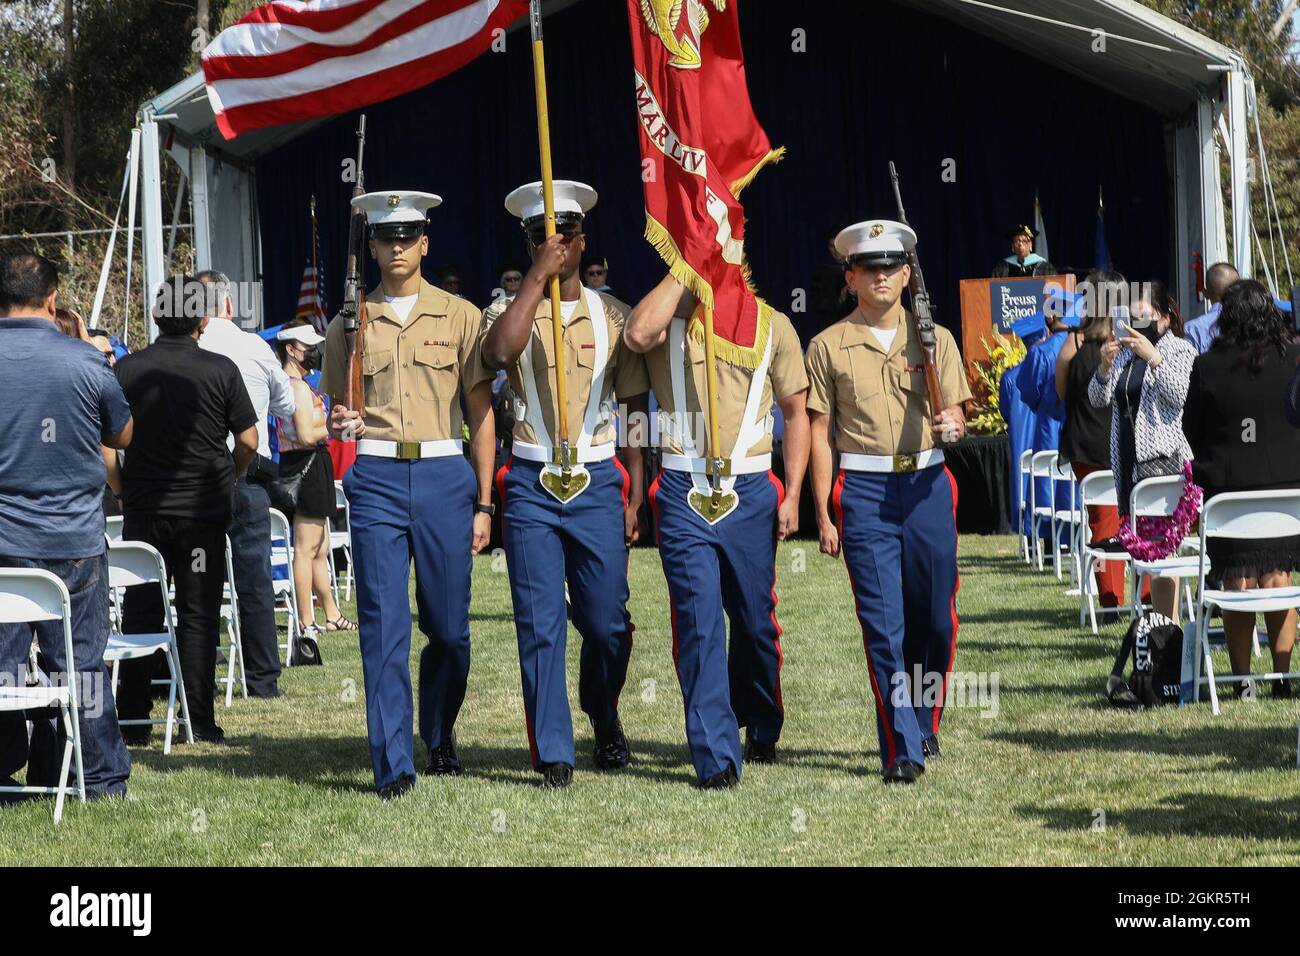 The 1st Marine Division (1st MARDIV) color guard marches the national colors and Marine Corps colors during a graduation ceremony at The Preuss School University of California San Diego in San Diego, California, June 17, 2021. The 1st MARDIV color guard attended the graduation to reinforce relationships with the local community. Stock Photo